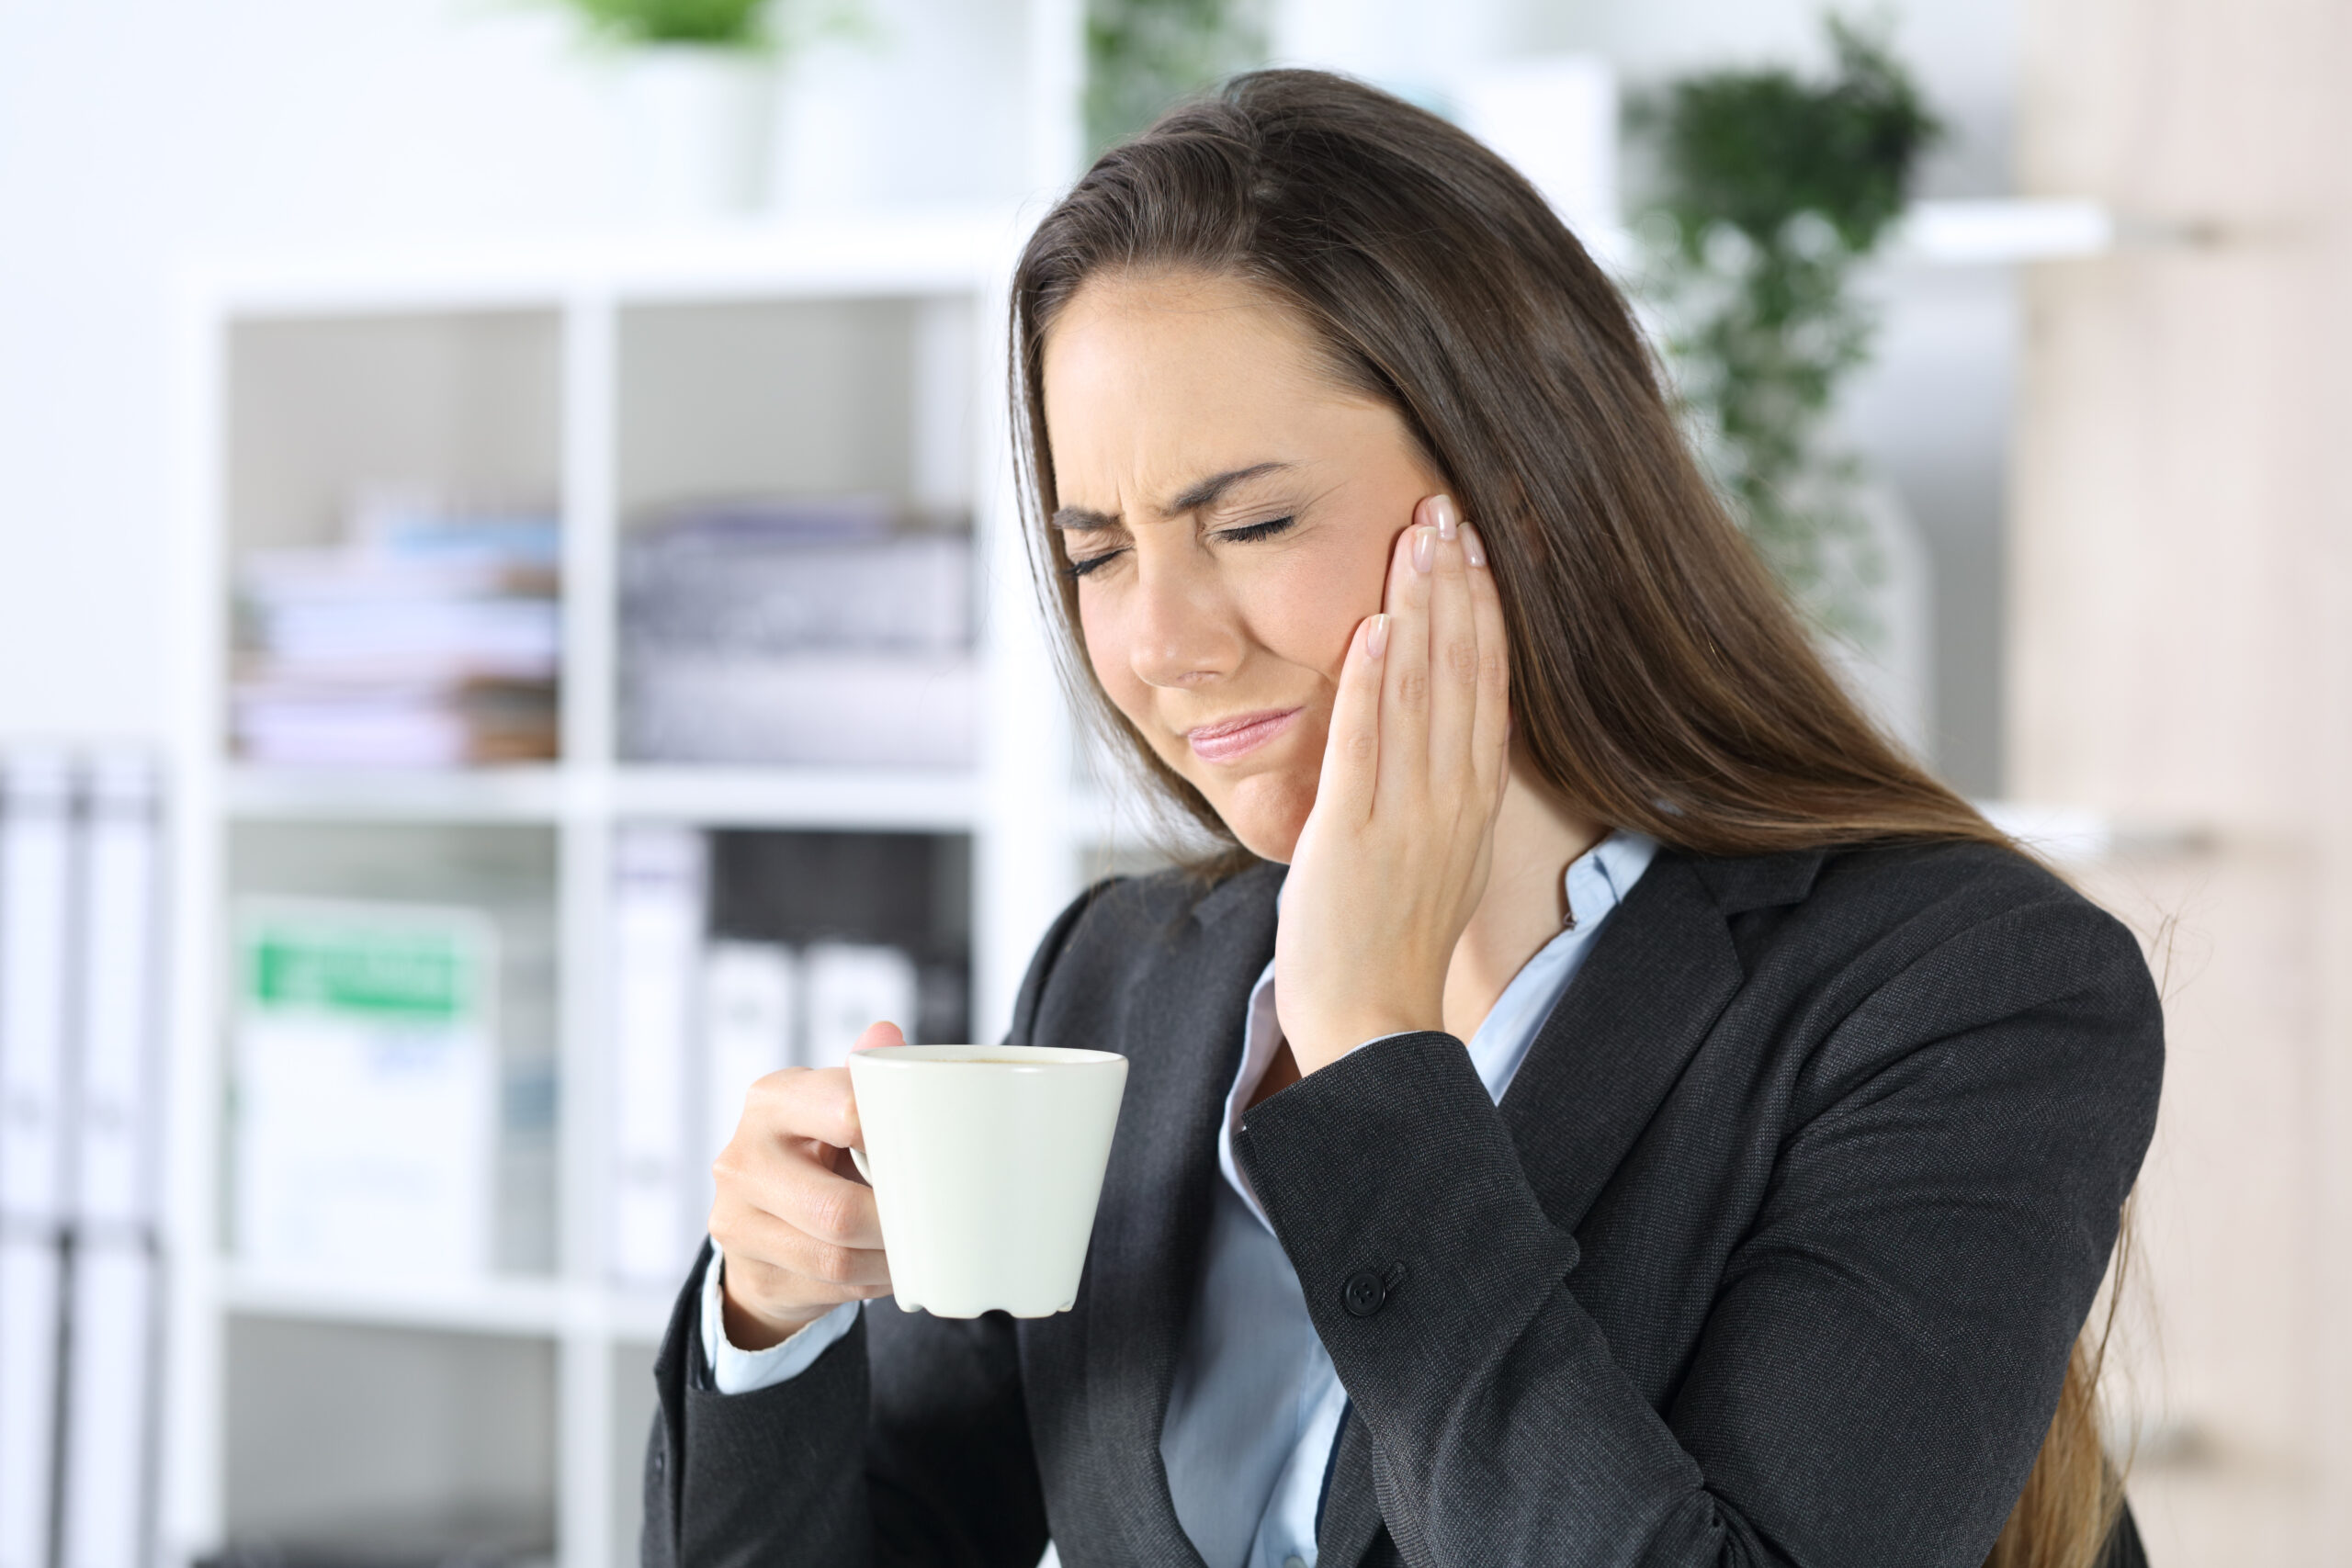 woman with tmj disorder wincing while drinking coffee